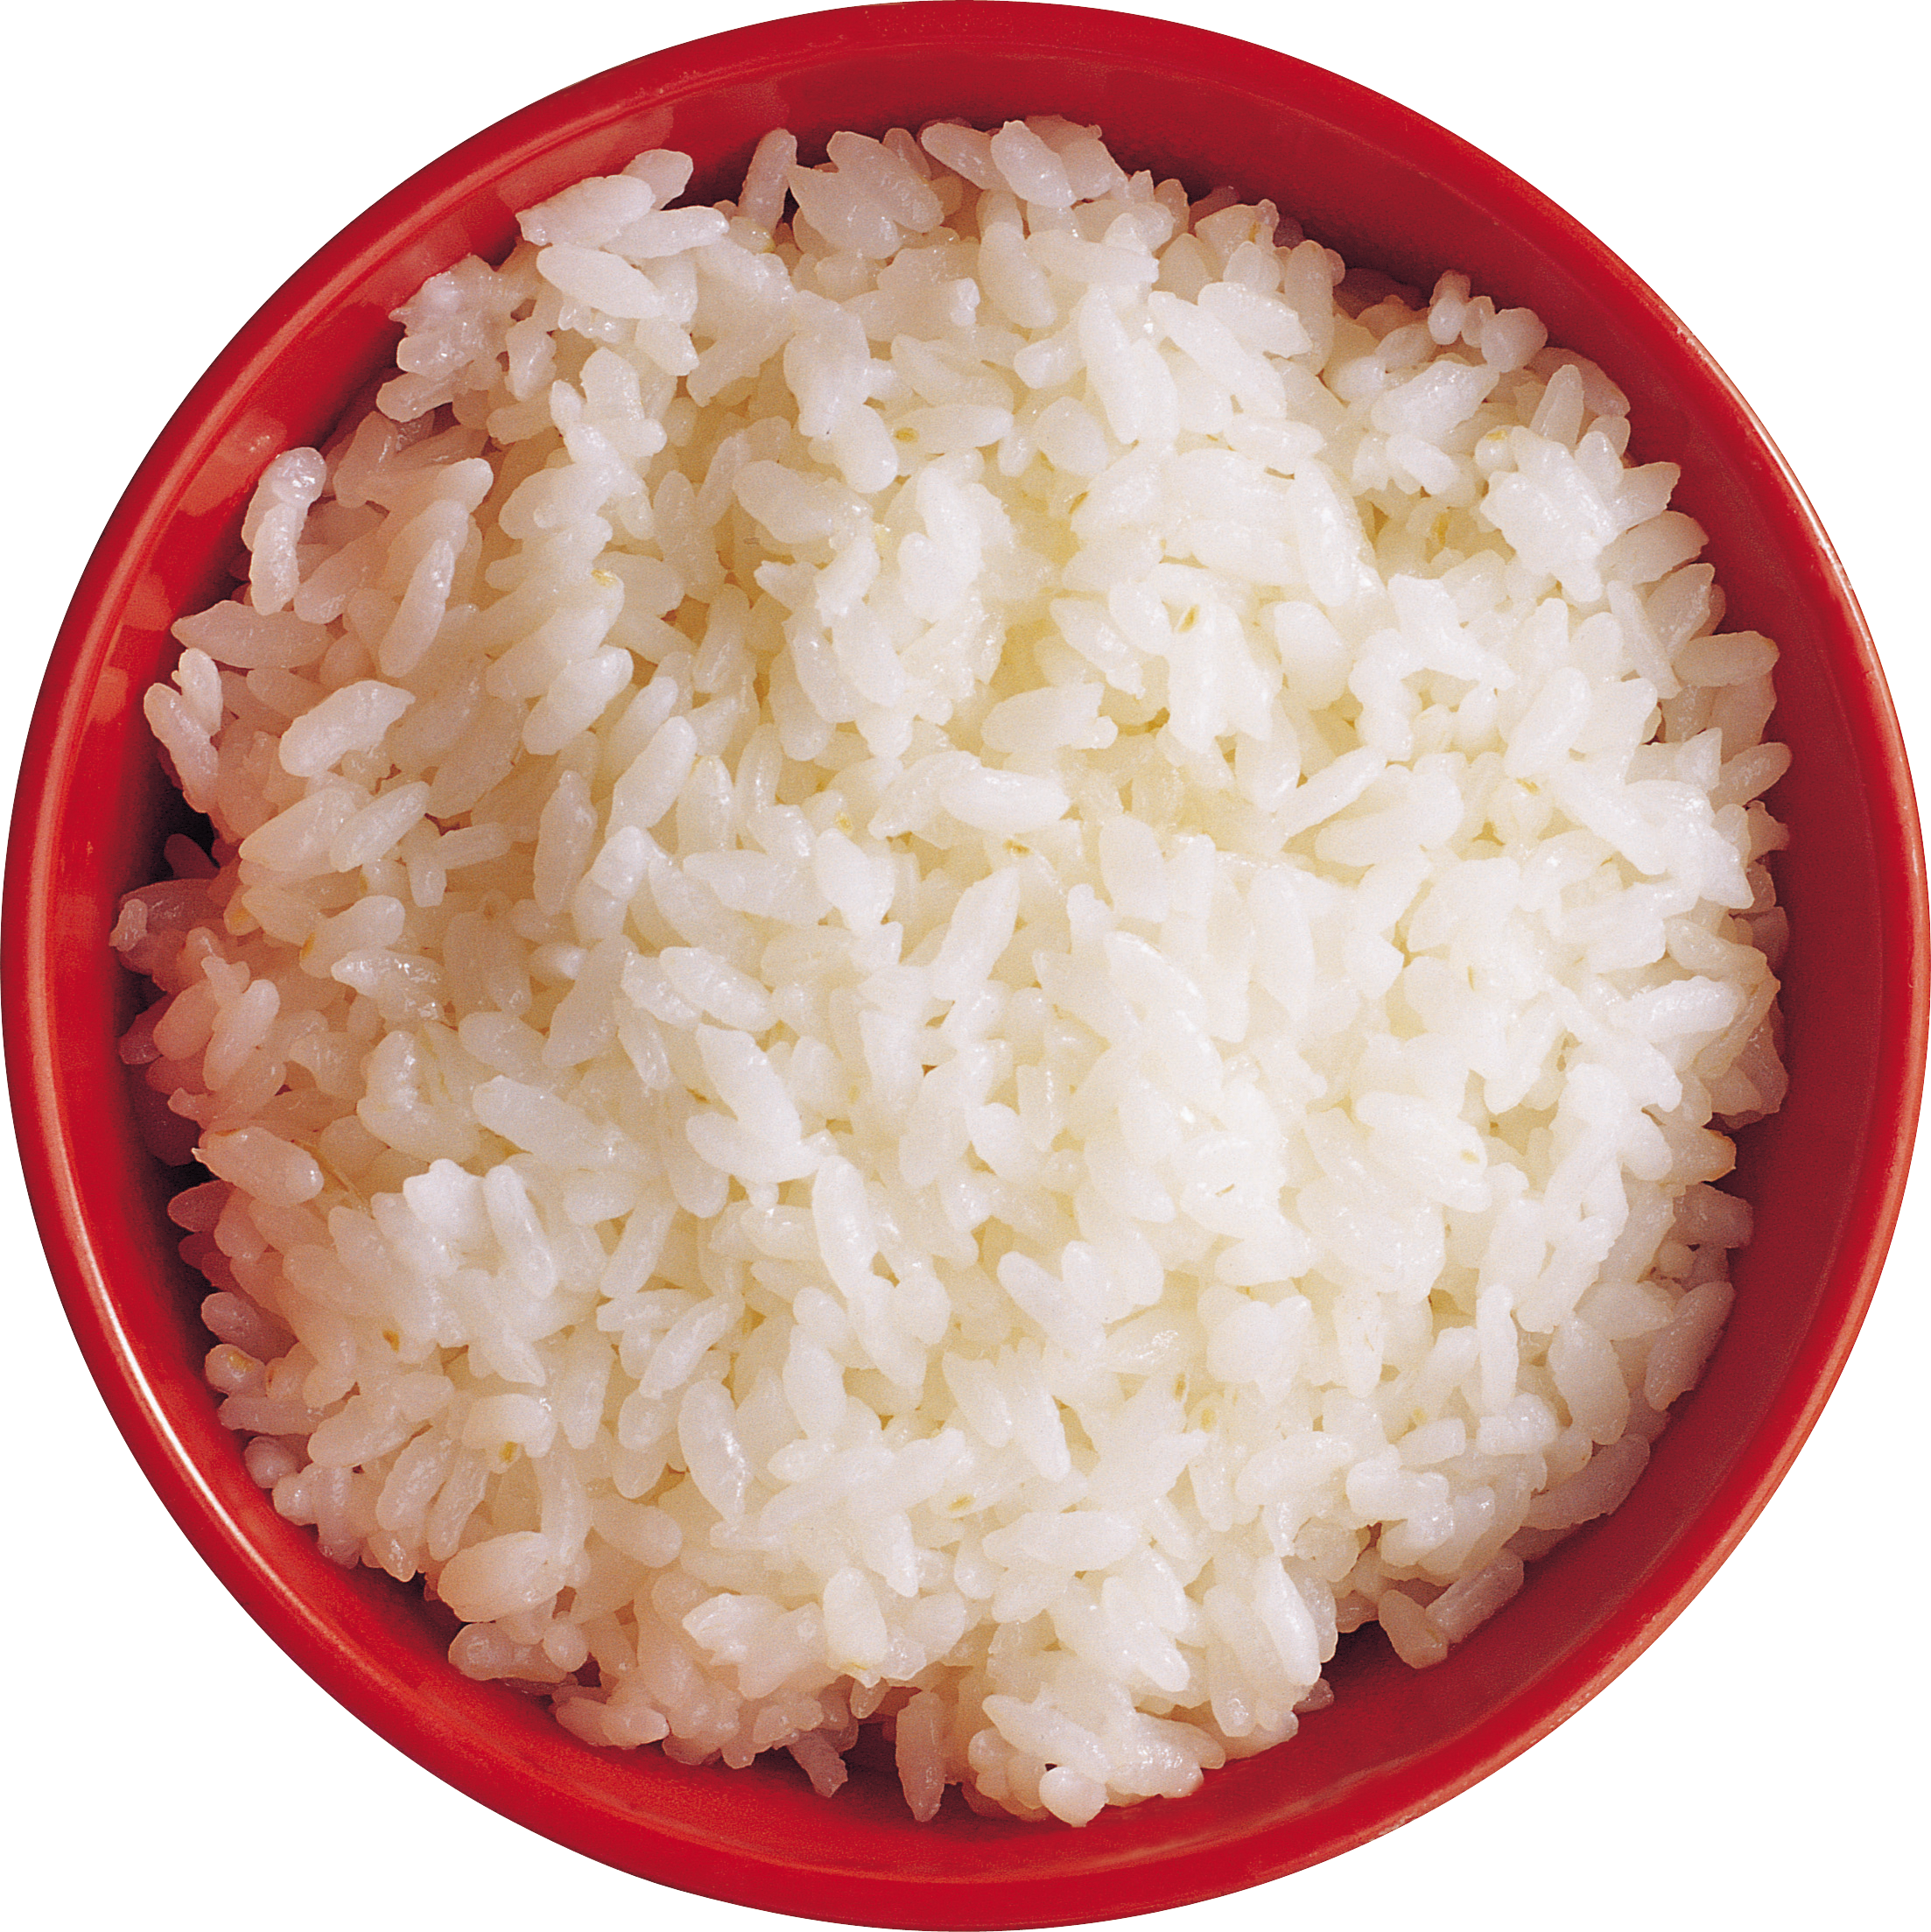 rice clipart steamed rice